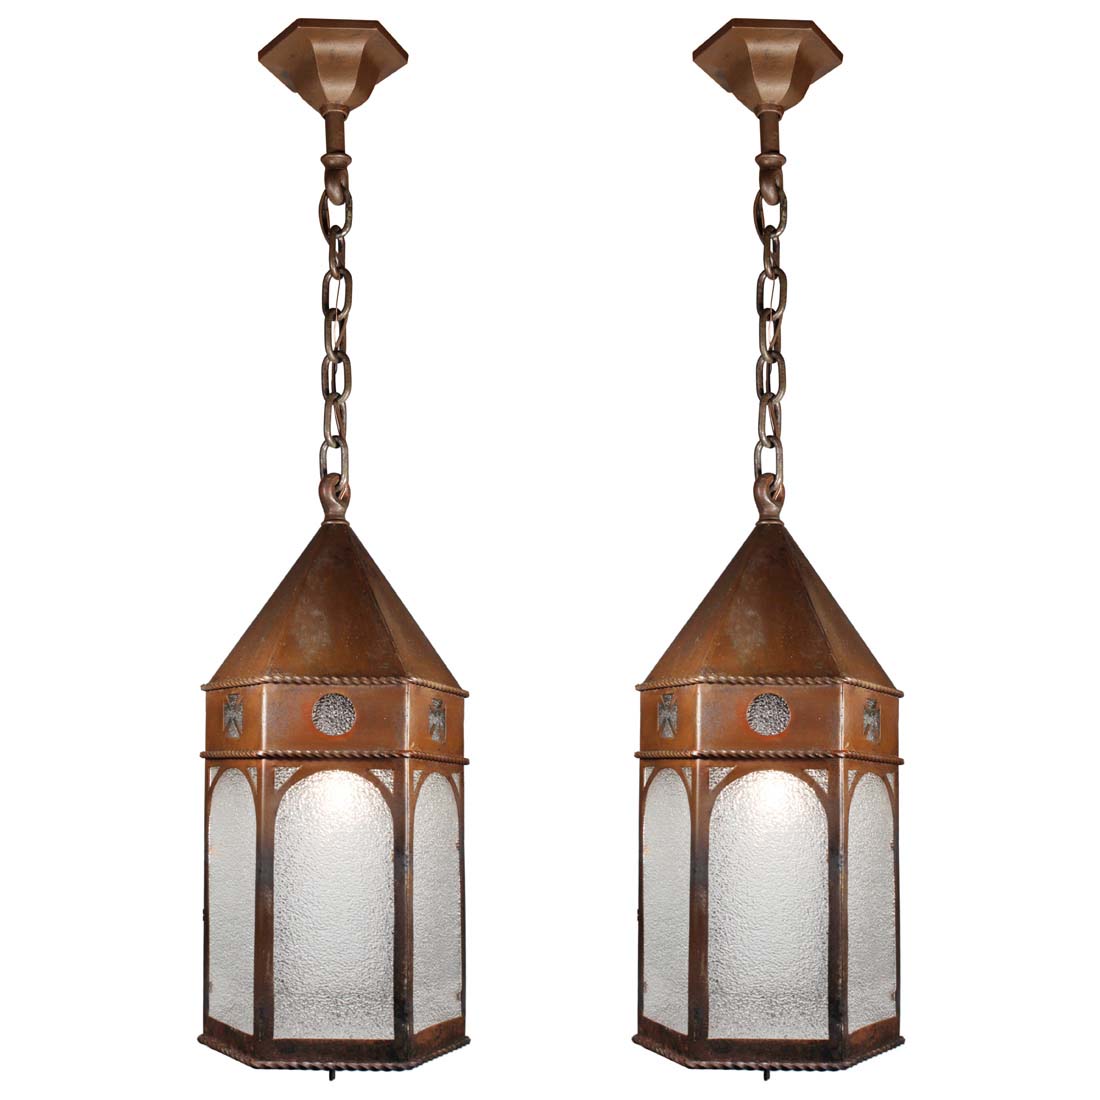 Matching Antique Bronze Lantern Pendant Lights with Granite Glass - Antique Lighting, Ceiling, Ceiling Exterior, Lighting, Pair/Multiple Chandeliers, Pendant Lighting, Recent Arrivals - The Preservation Station